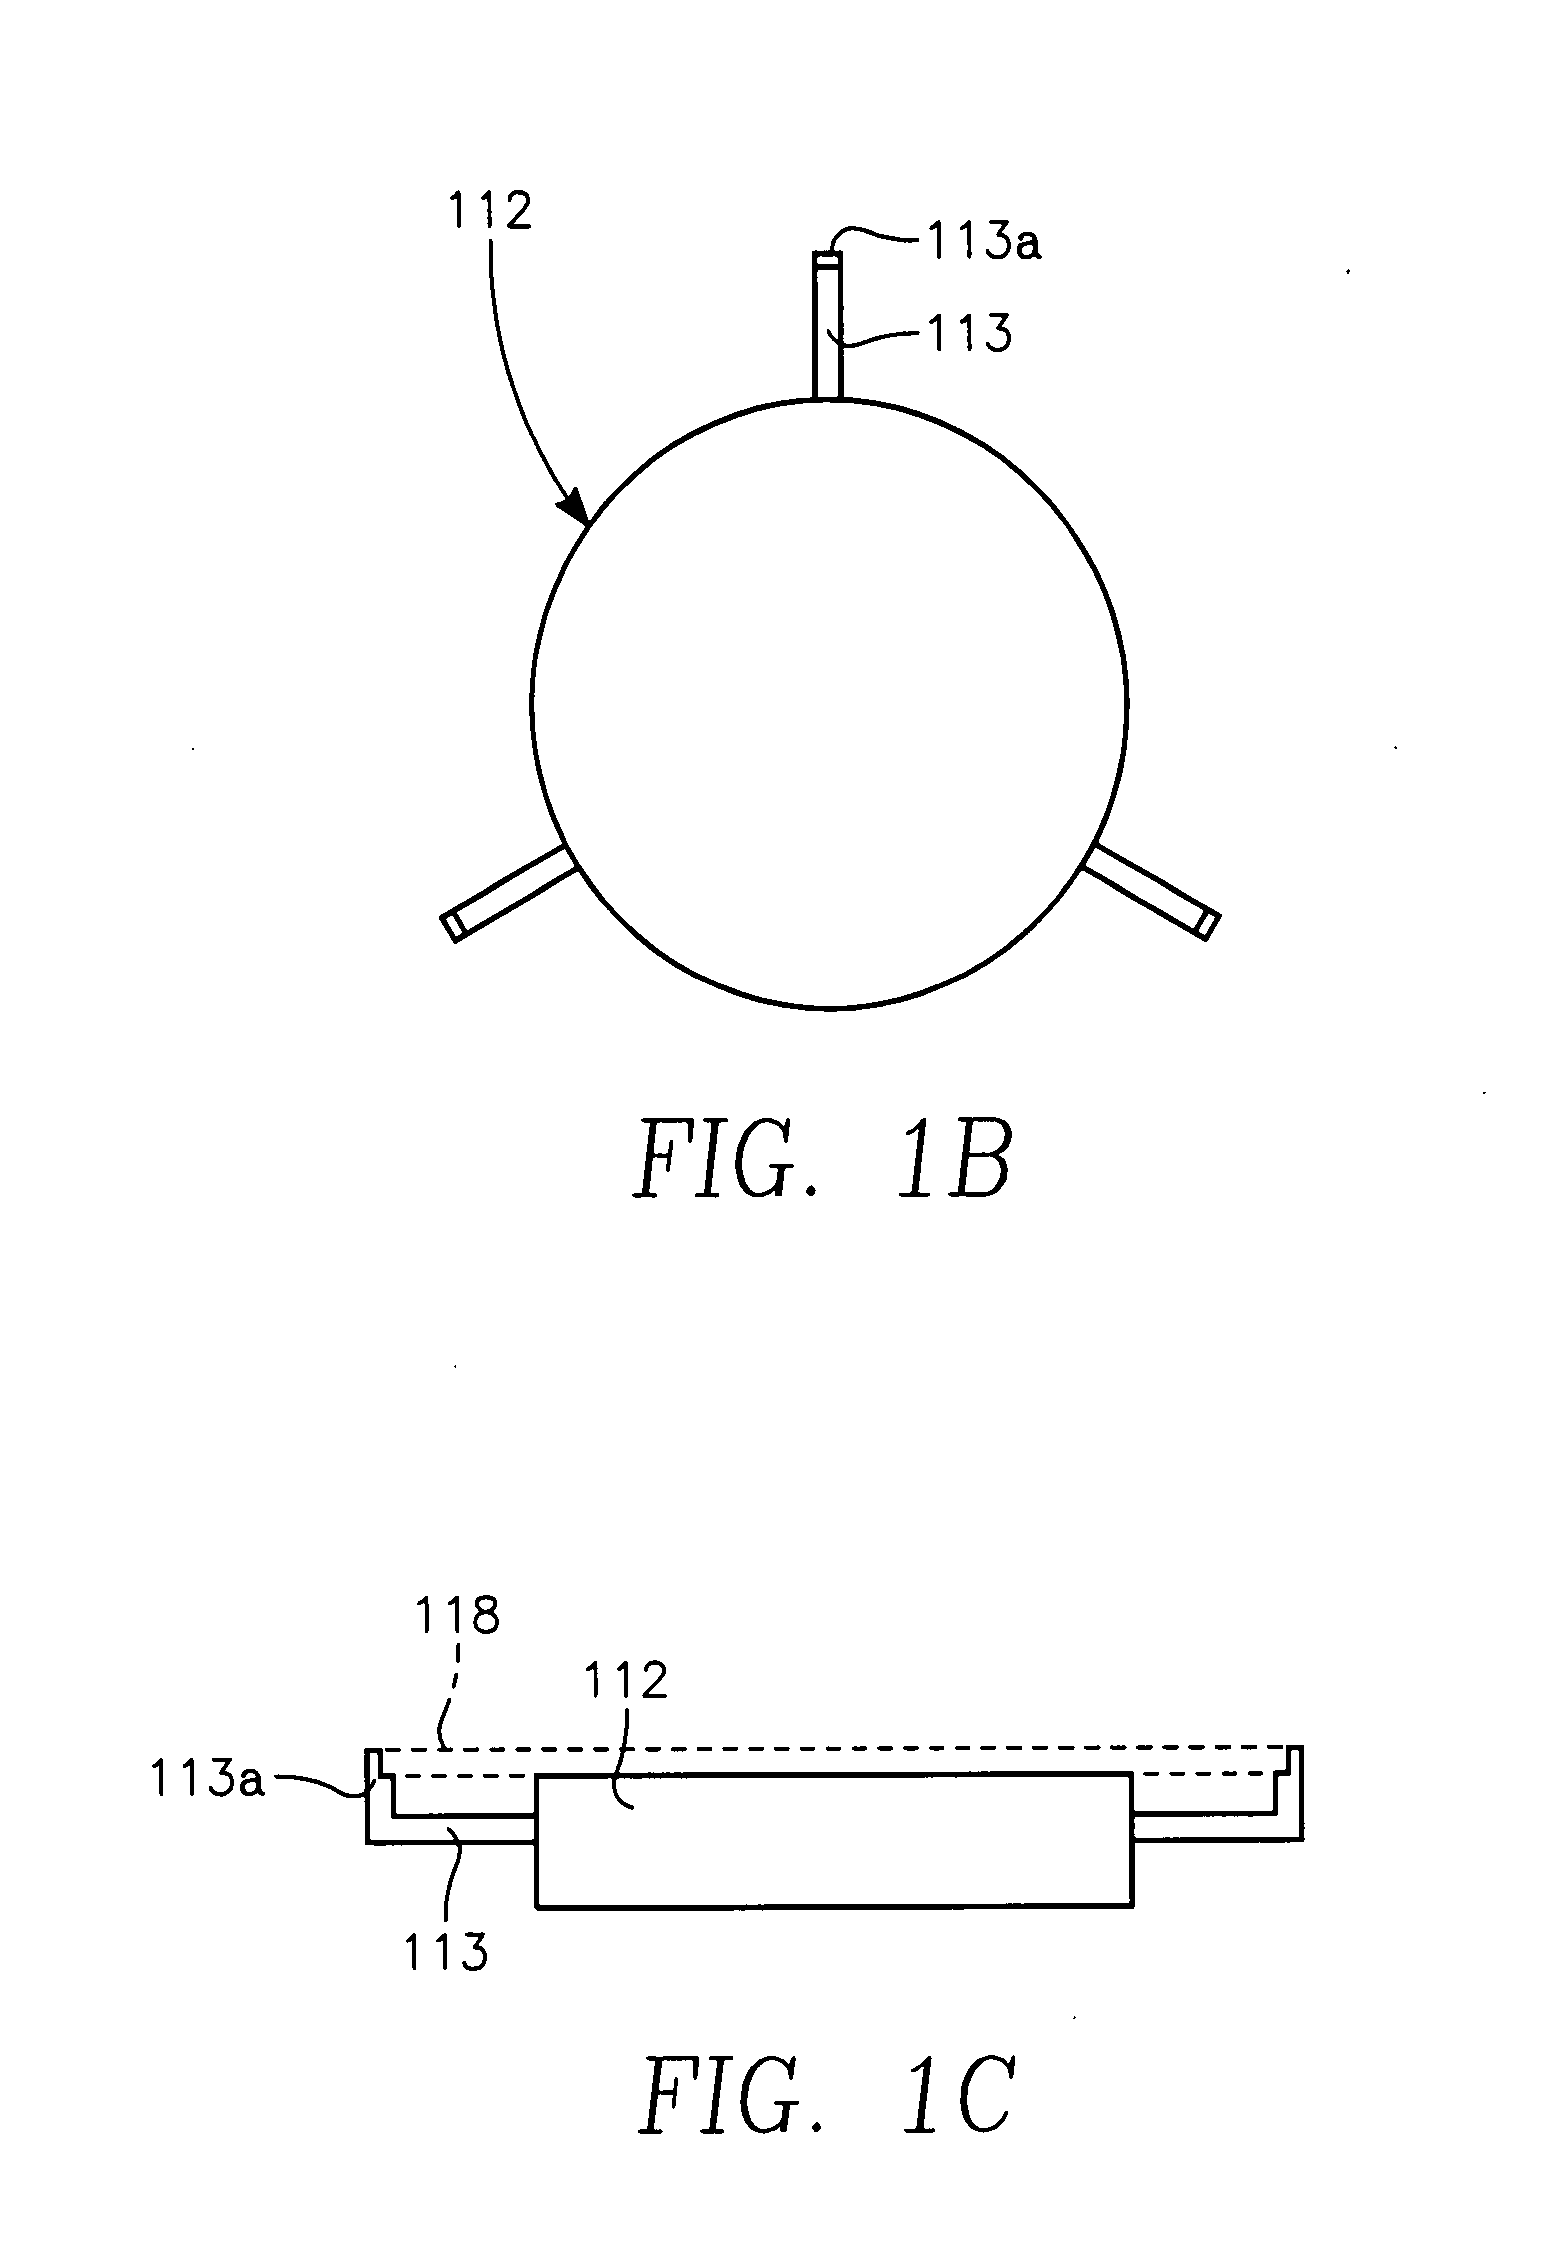 Process for wafer backside polymer removal and wafer front side photoresist removal